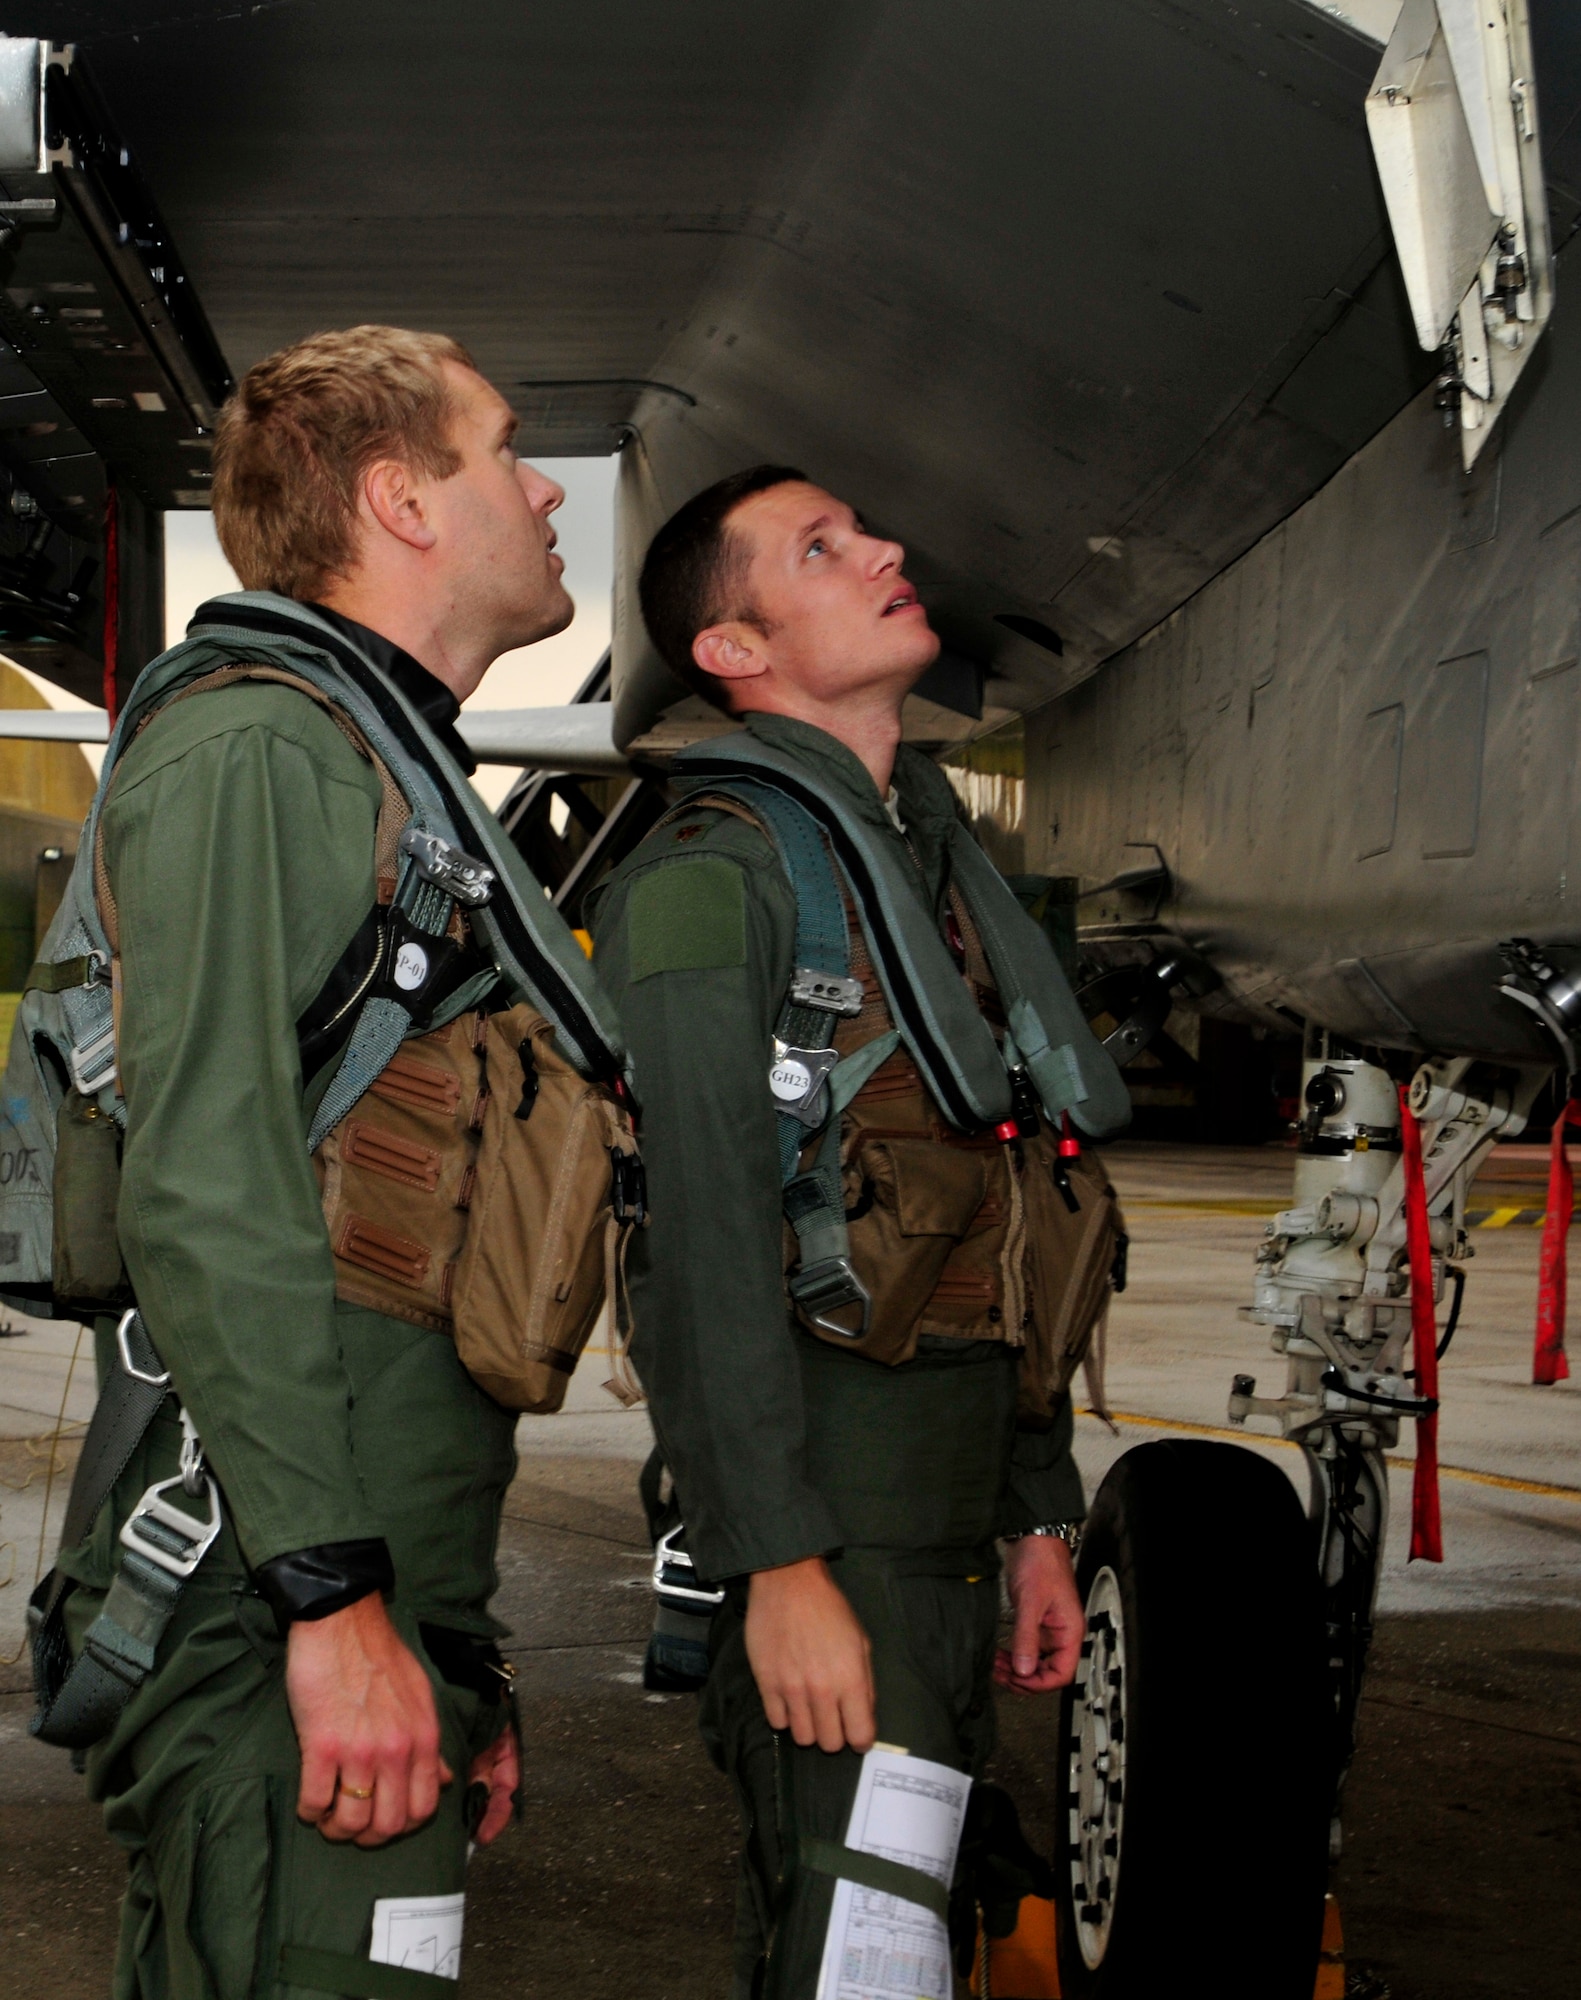 ROYAL AIR FORCE LAKENHEATH, England - U.S. Air Force Maj. Mike Conrad, 493rd Fighter Squadron pilot, (left) checks aircraft forms as Swedish Air Force Capt Fredrik Bergstrom, 211th Fighter Squadron, watches prior to take-off, Nov. 17, 2011. This is Bergstrom's first time ever in a foreign aircraft.Members from the SAF and the 48th Fighter Wing trained together to increase their interoperability and gather experience with foreign aircraft. (U.S. Air Force photo by Senior Airman Tiffany M. Deuel)